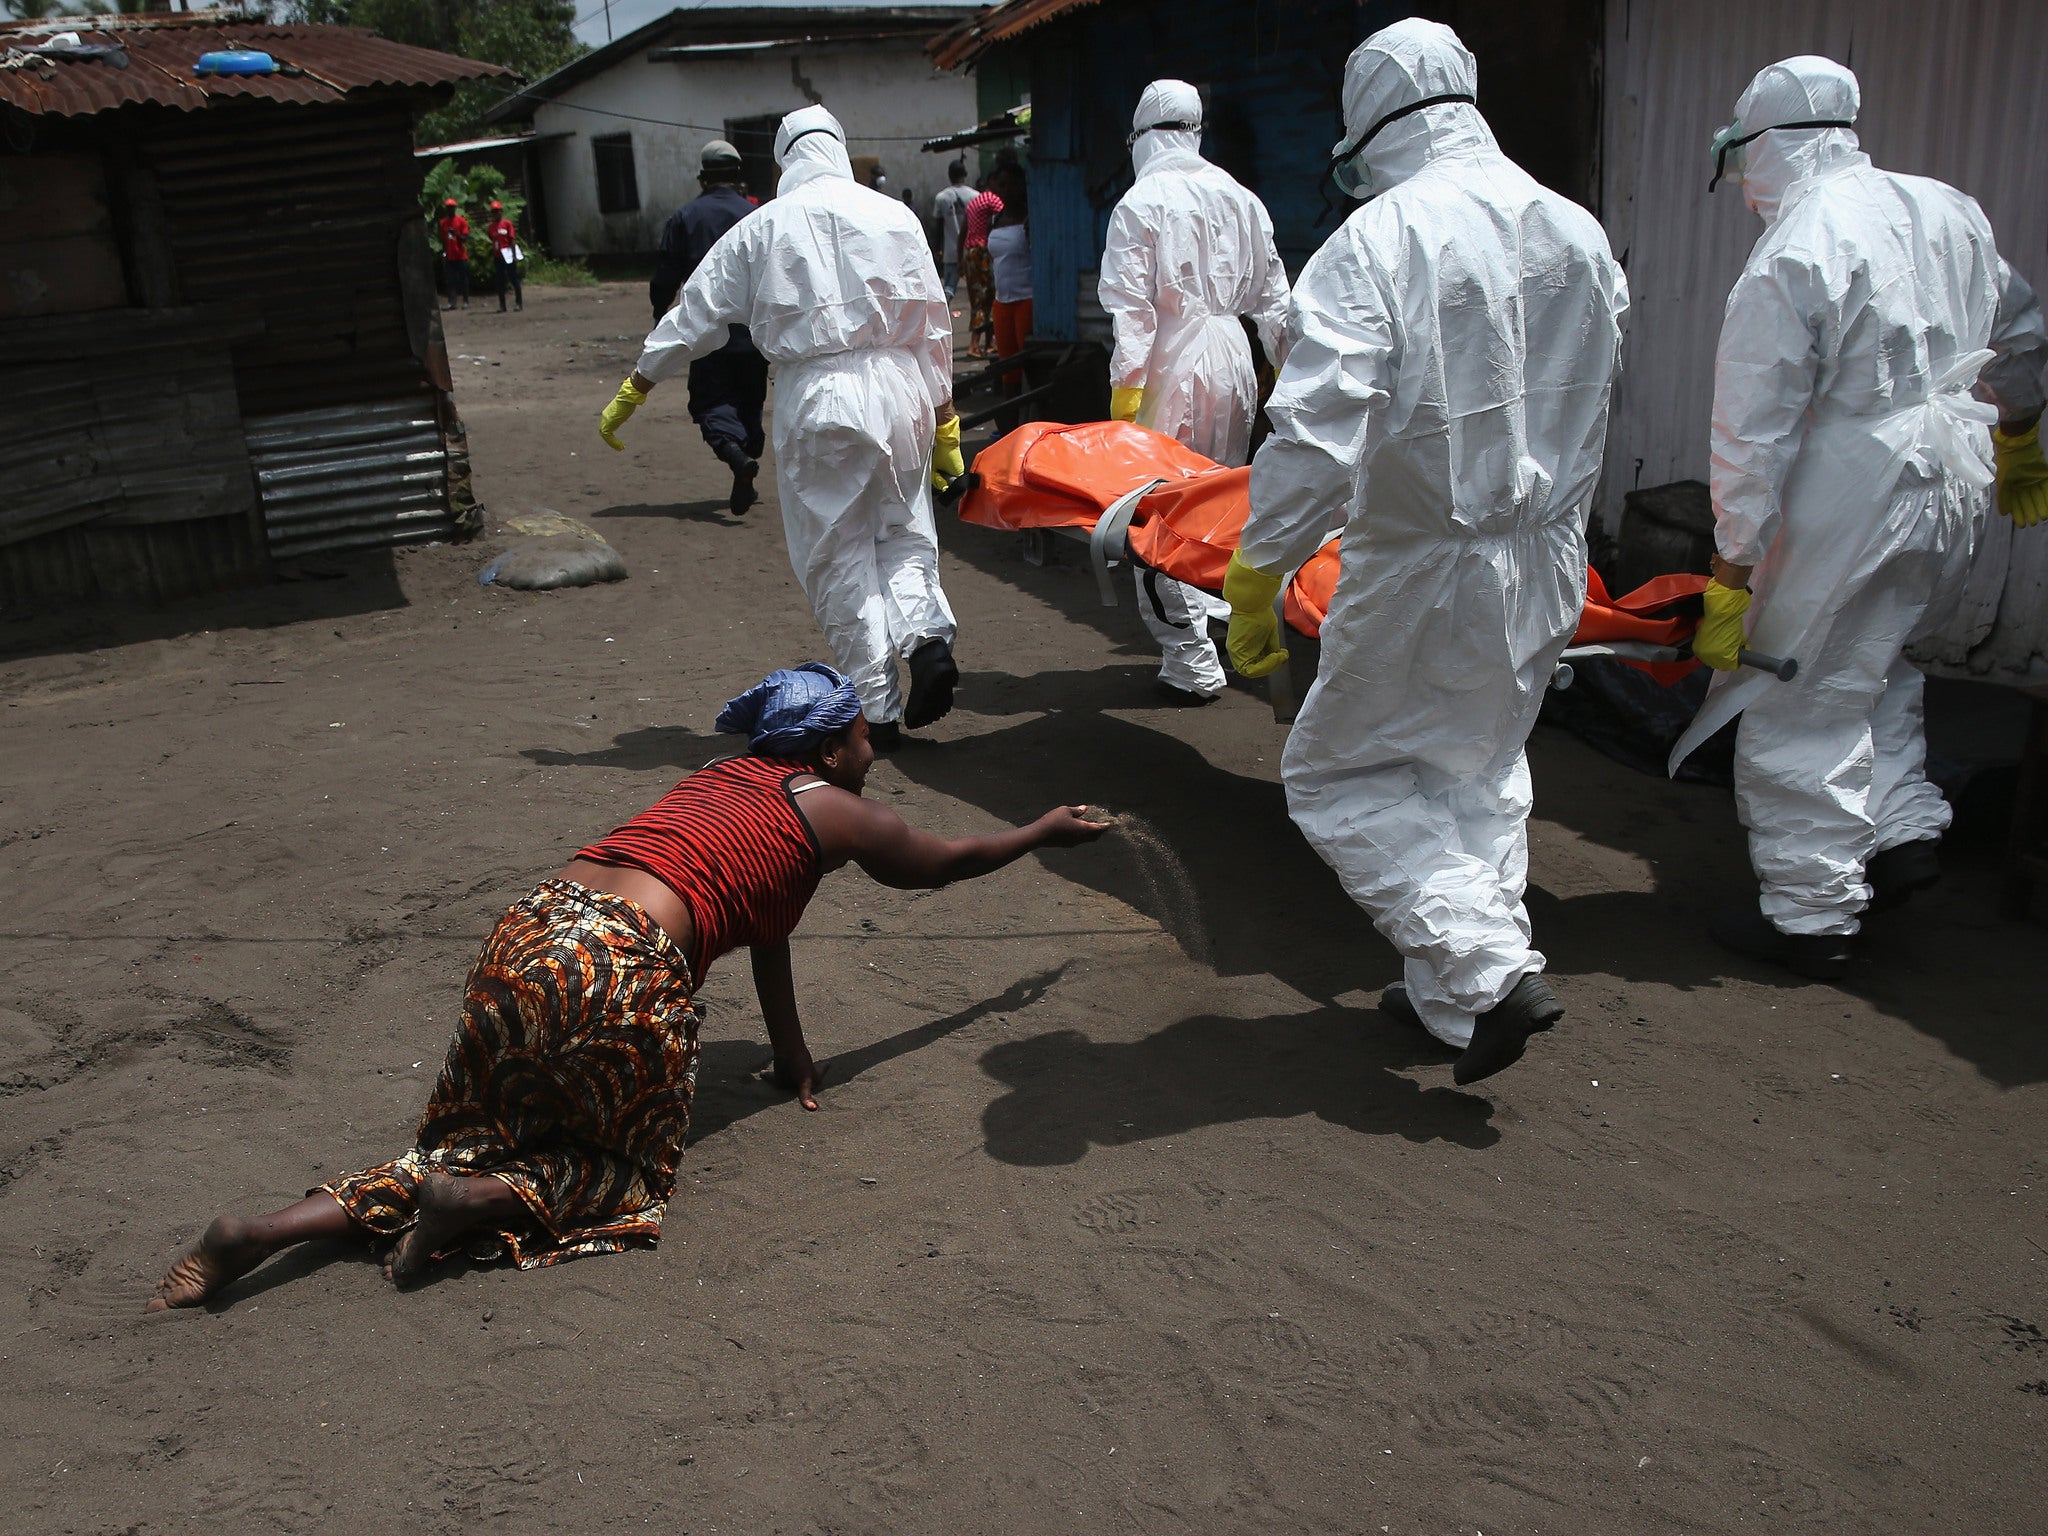 A woman throws a handful of soil towards the body of her sister as Ebola burial team members take her sister for cremation.